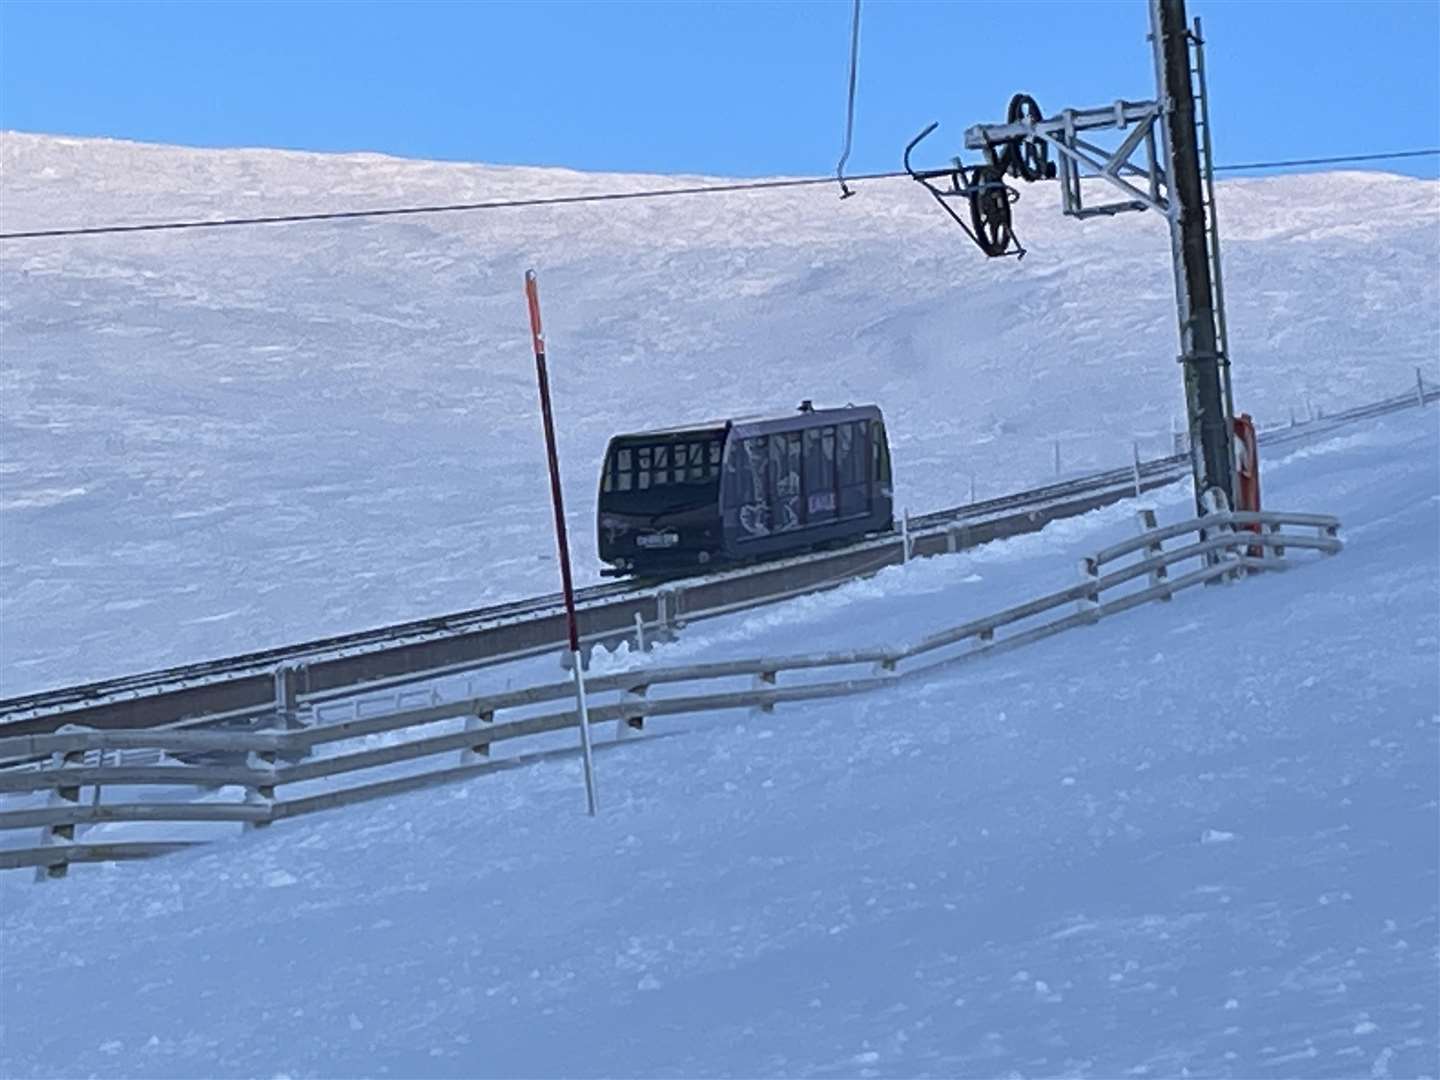 The Cairngorm funicular running wihtout passengers at the resort at the end of last week.